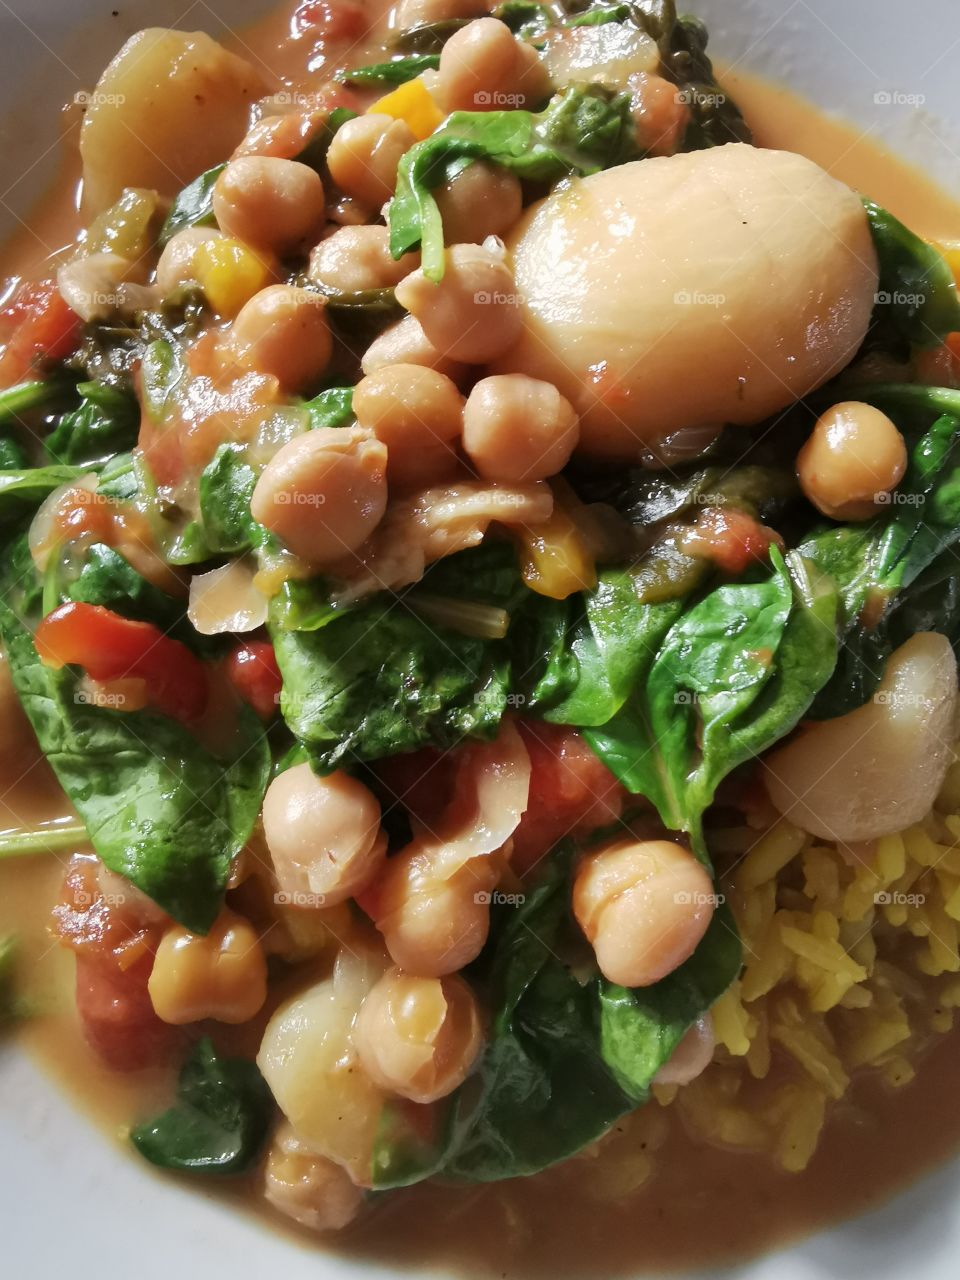 Chickpea Stew!